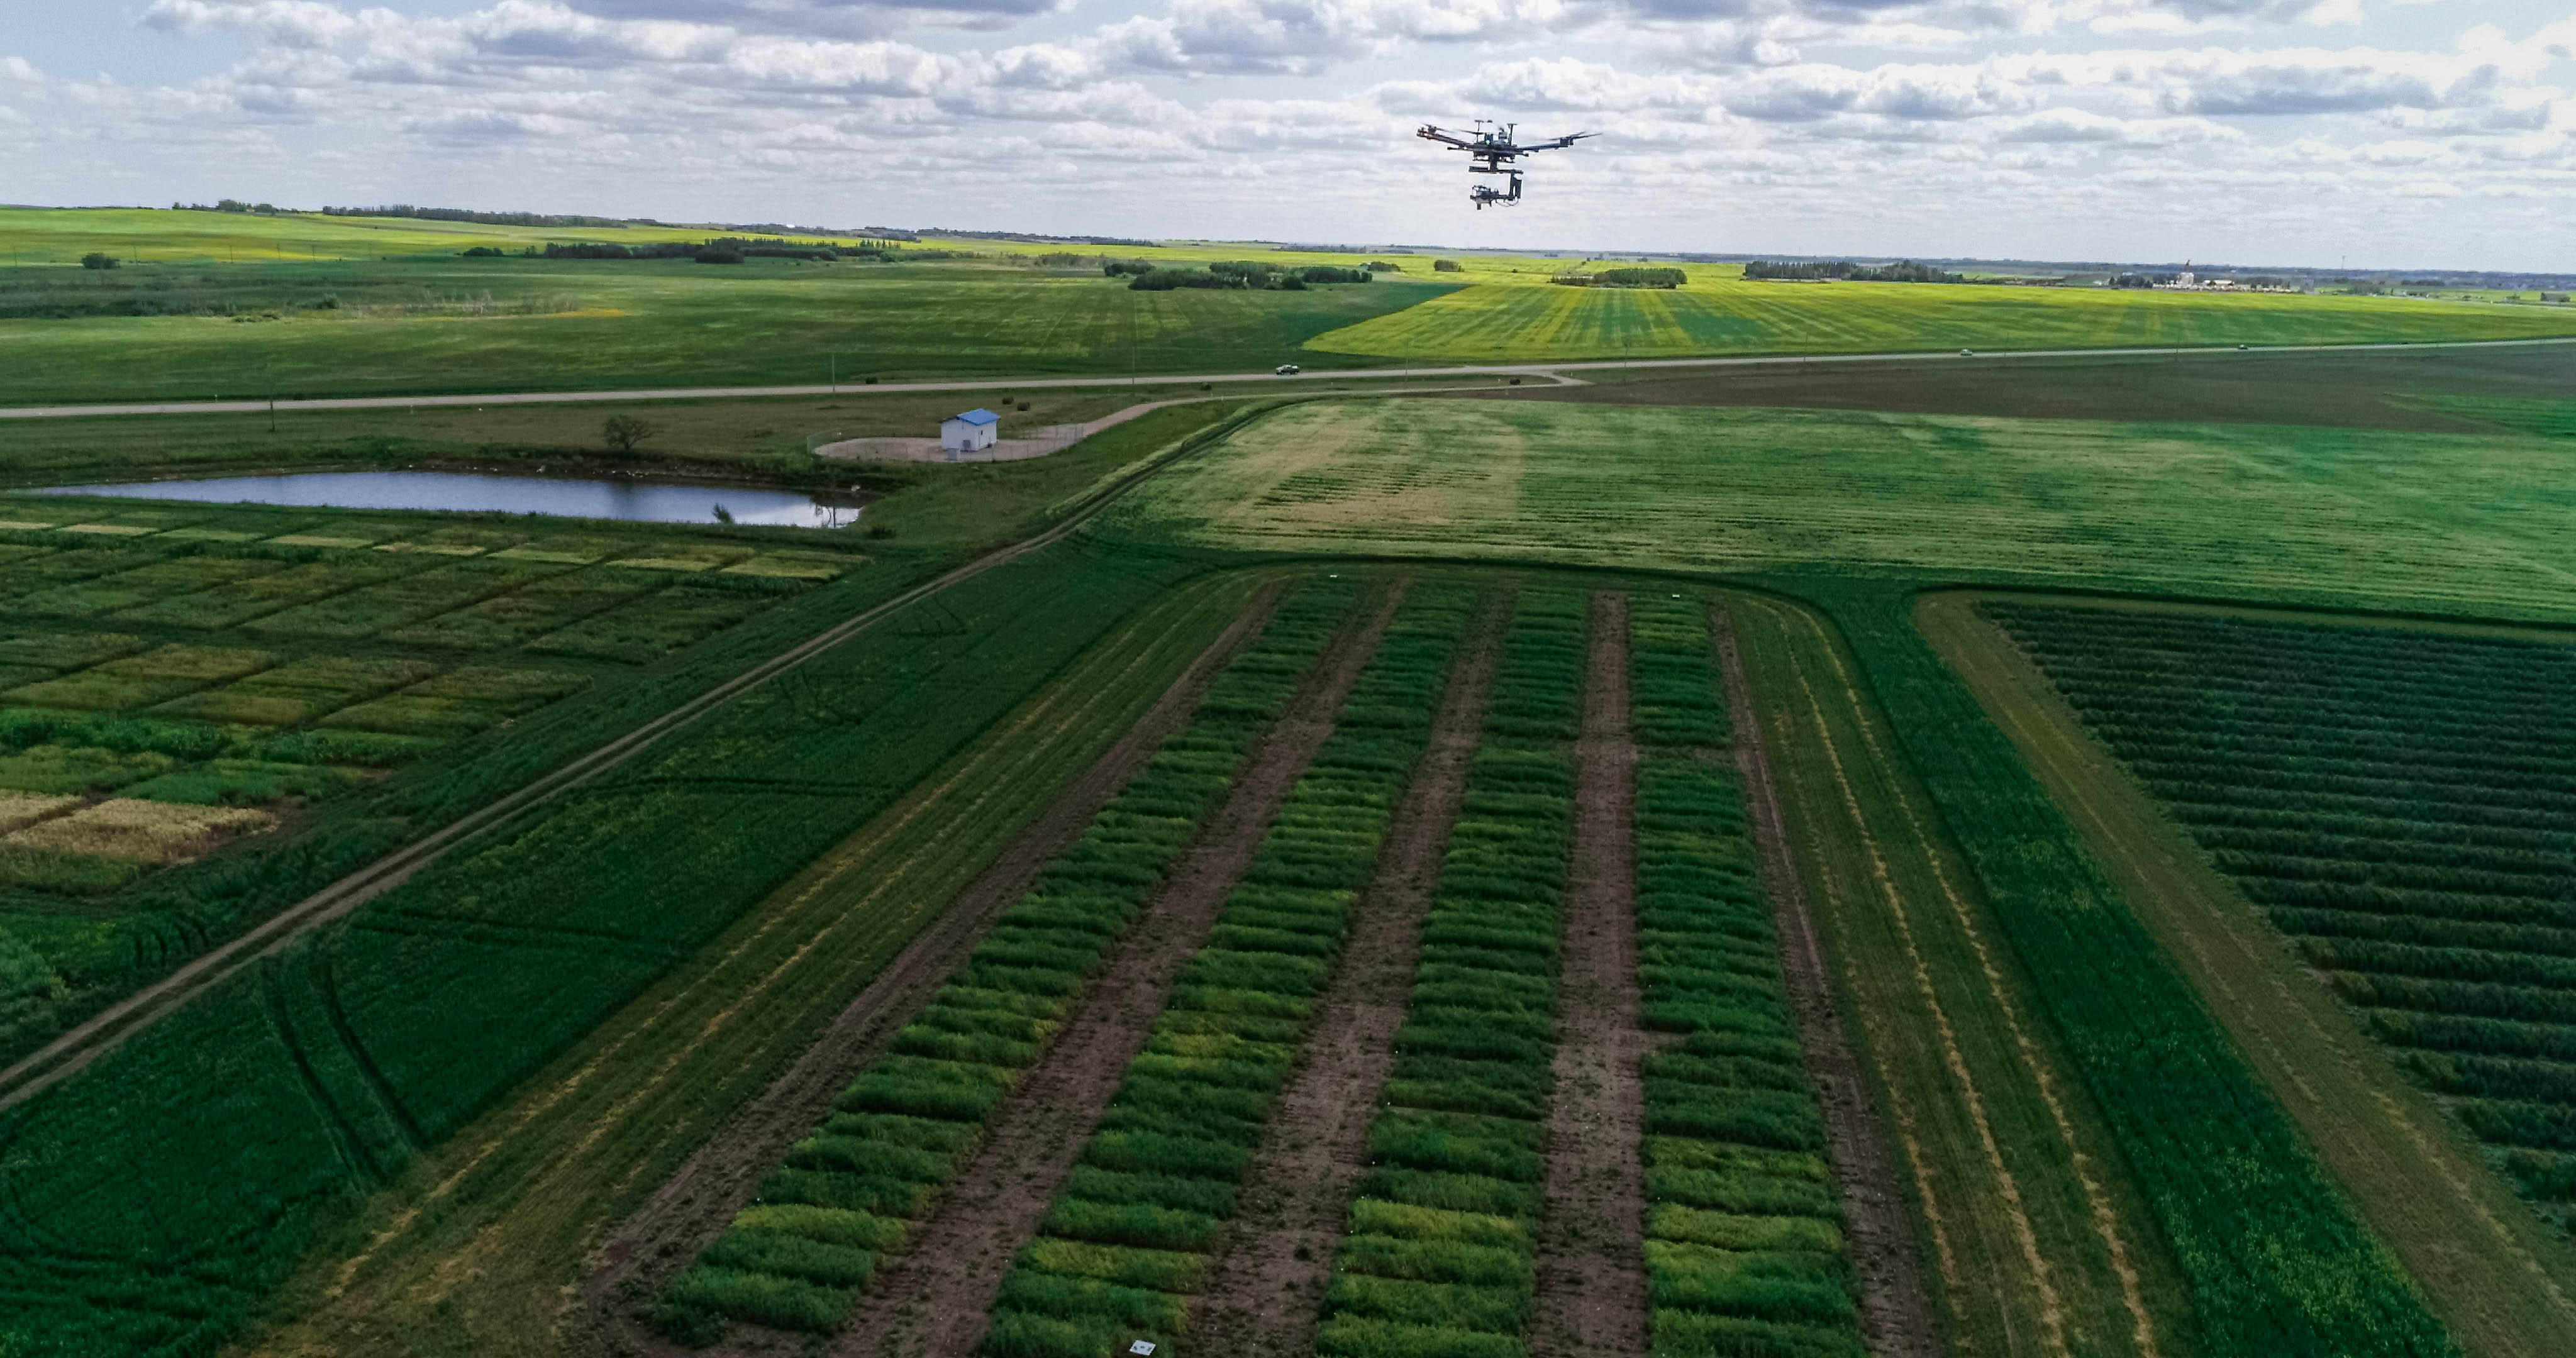 Drone captures crop images at USask’s plant research fields (Credit: Seungbum Steve Ryu)